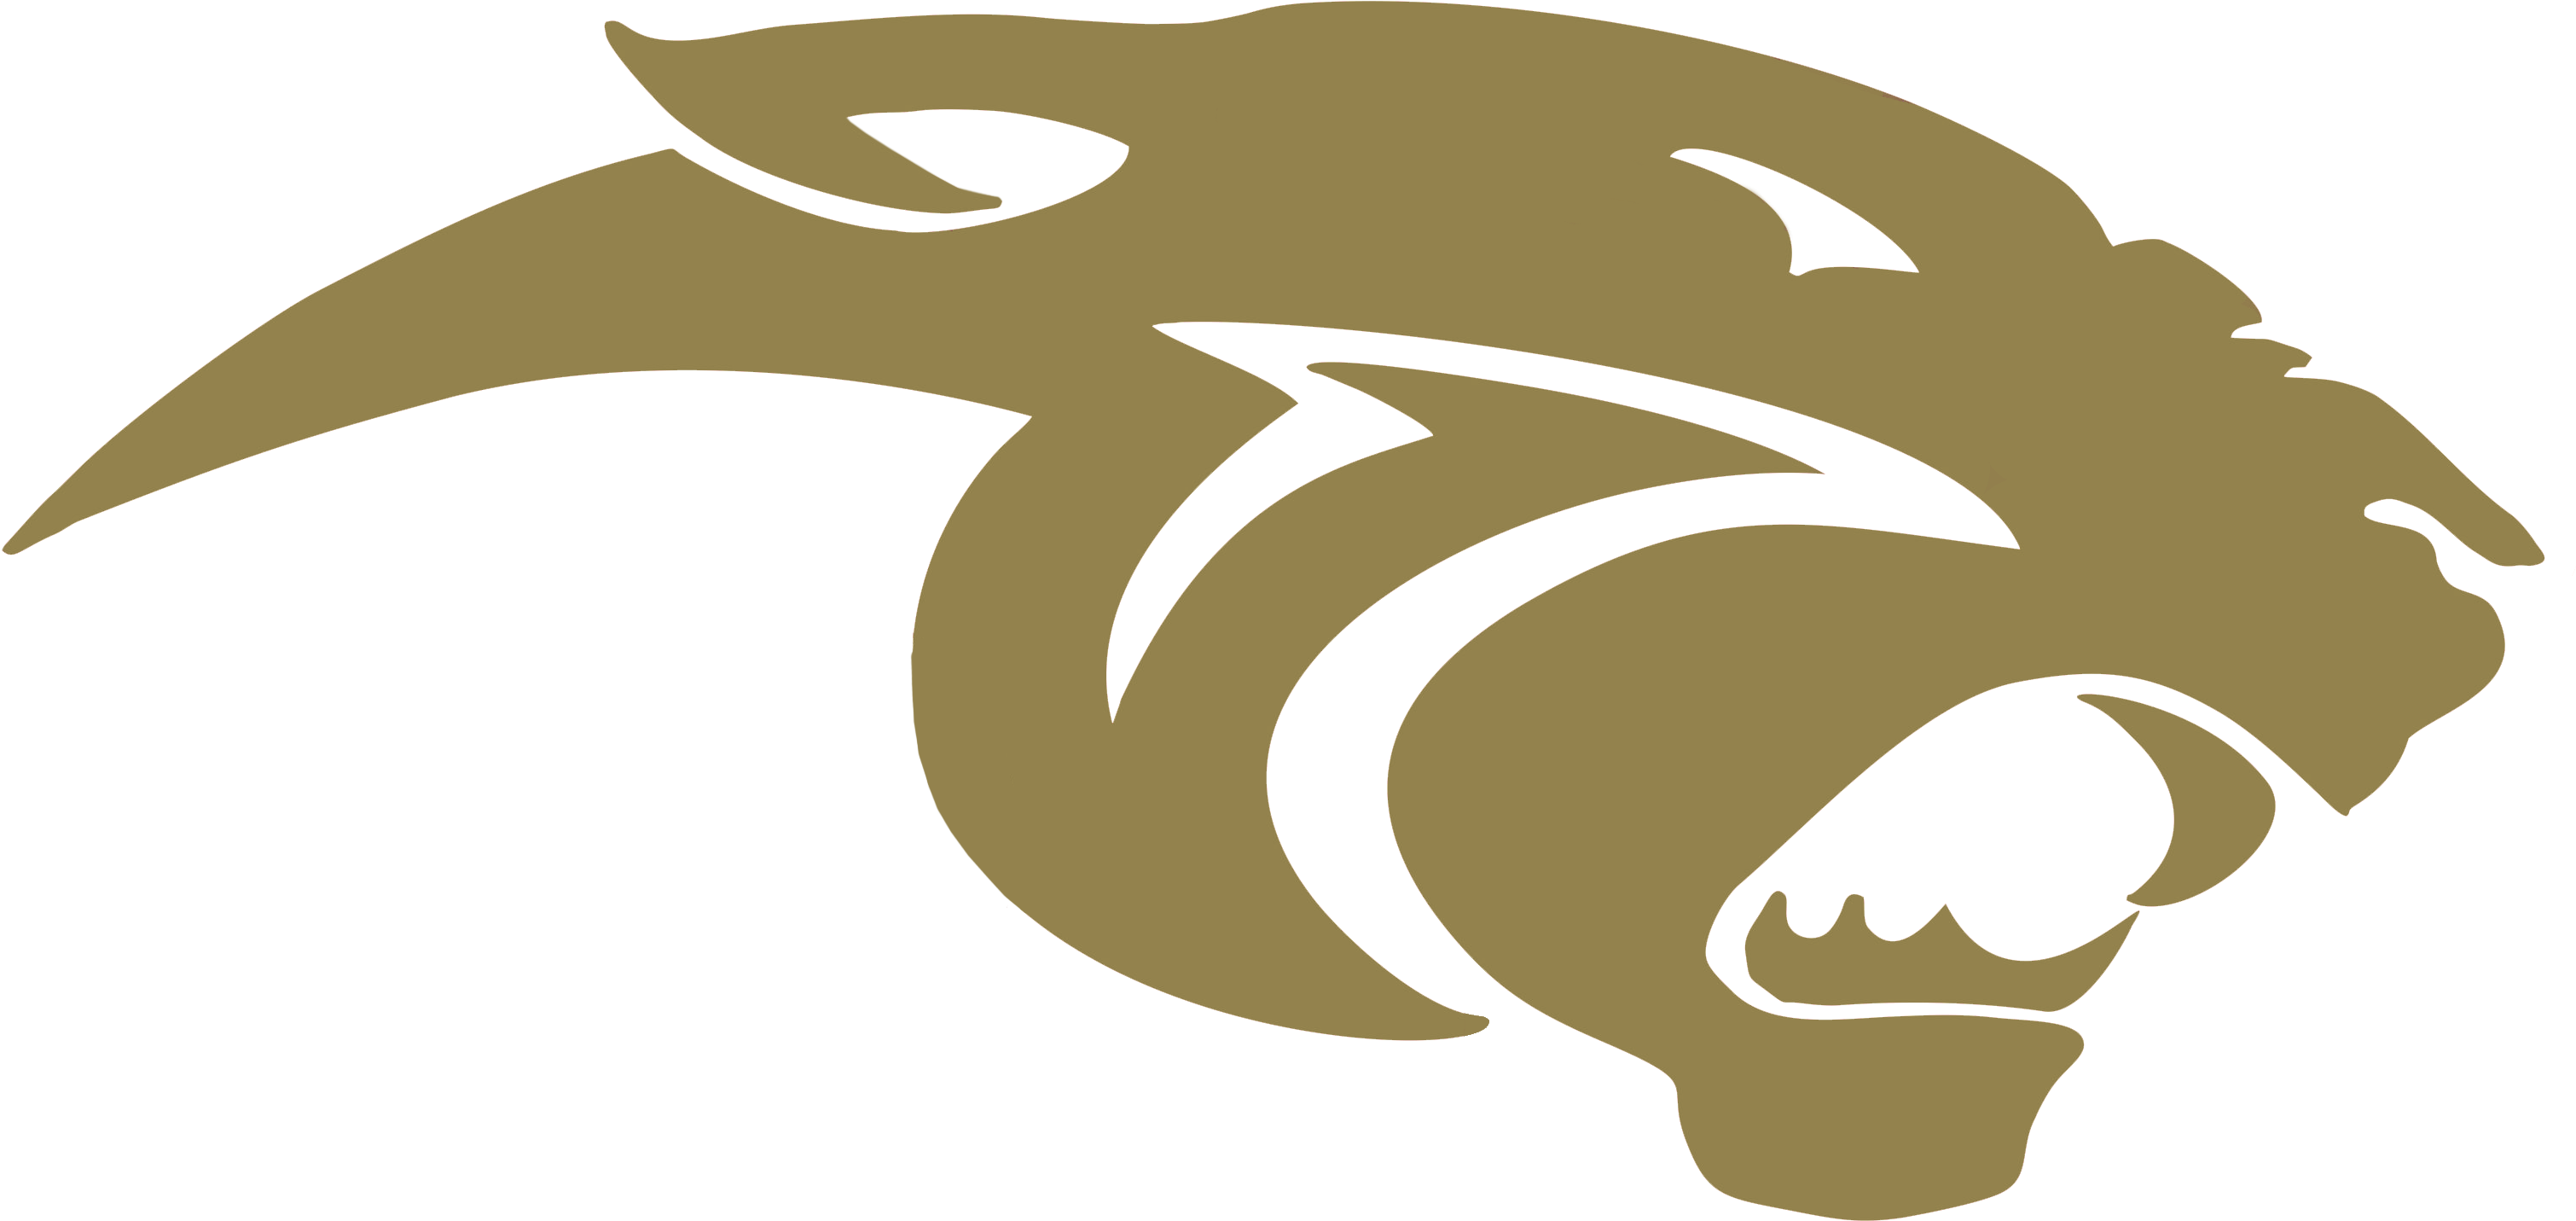 A Gold Logo With Black Background